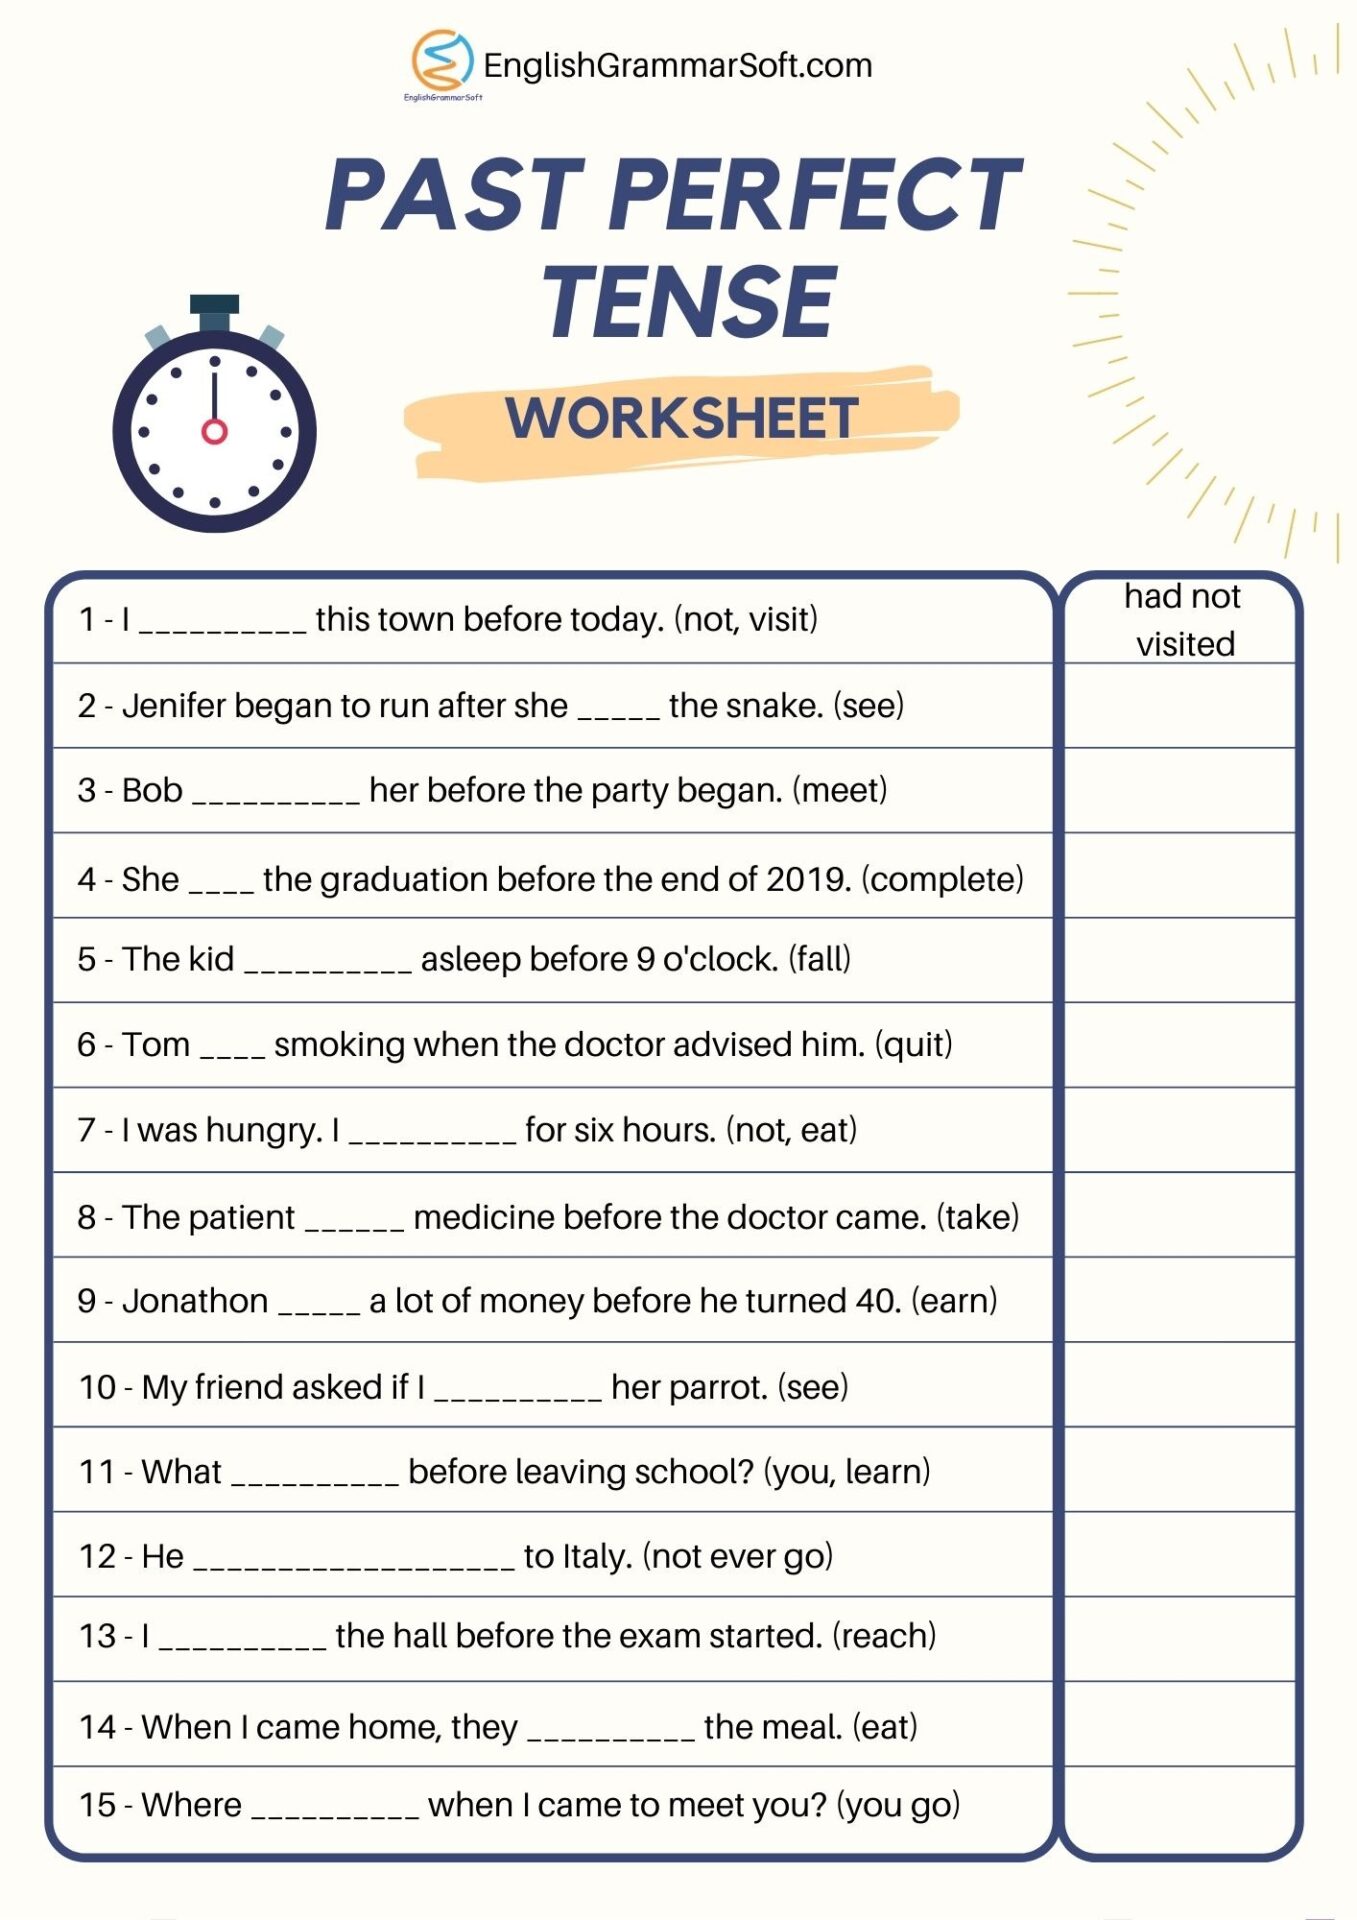 Worksheet For Past Perfect Tense With Answers My XXX Hot Girl